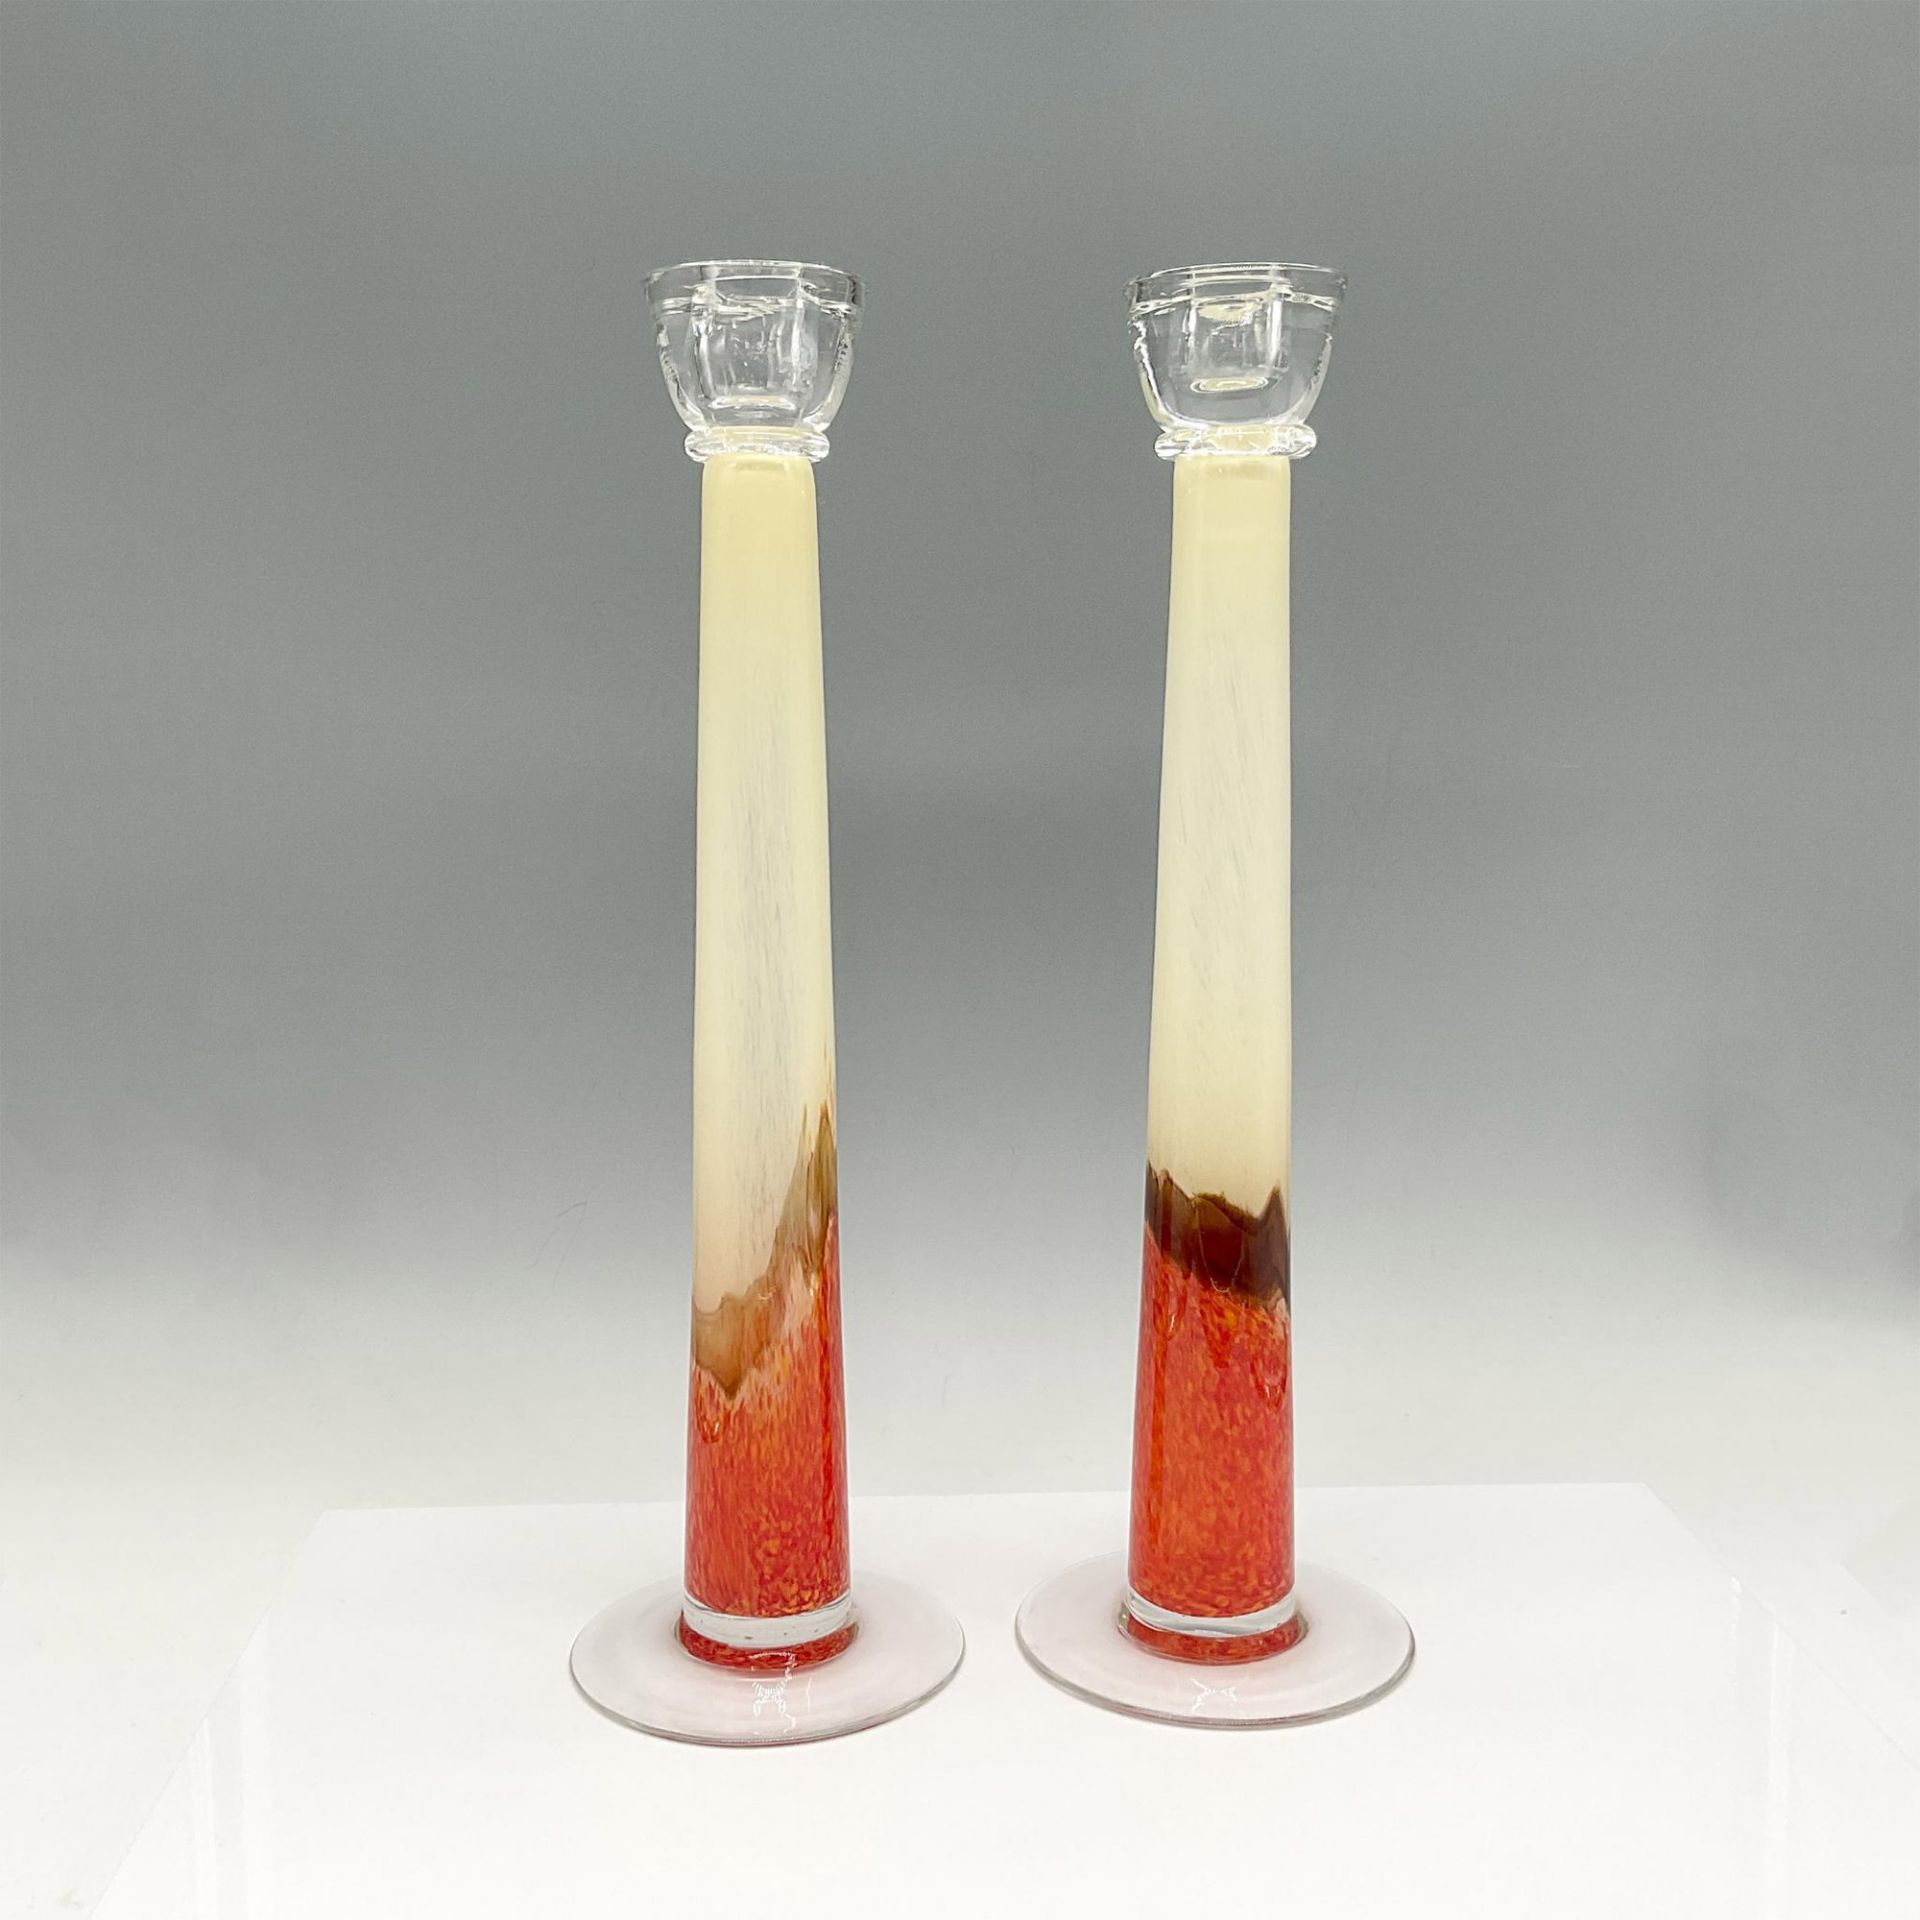 2pc Rare Hand-Blown Art Glass Candle Holders